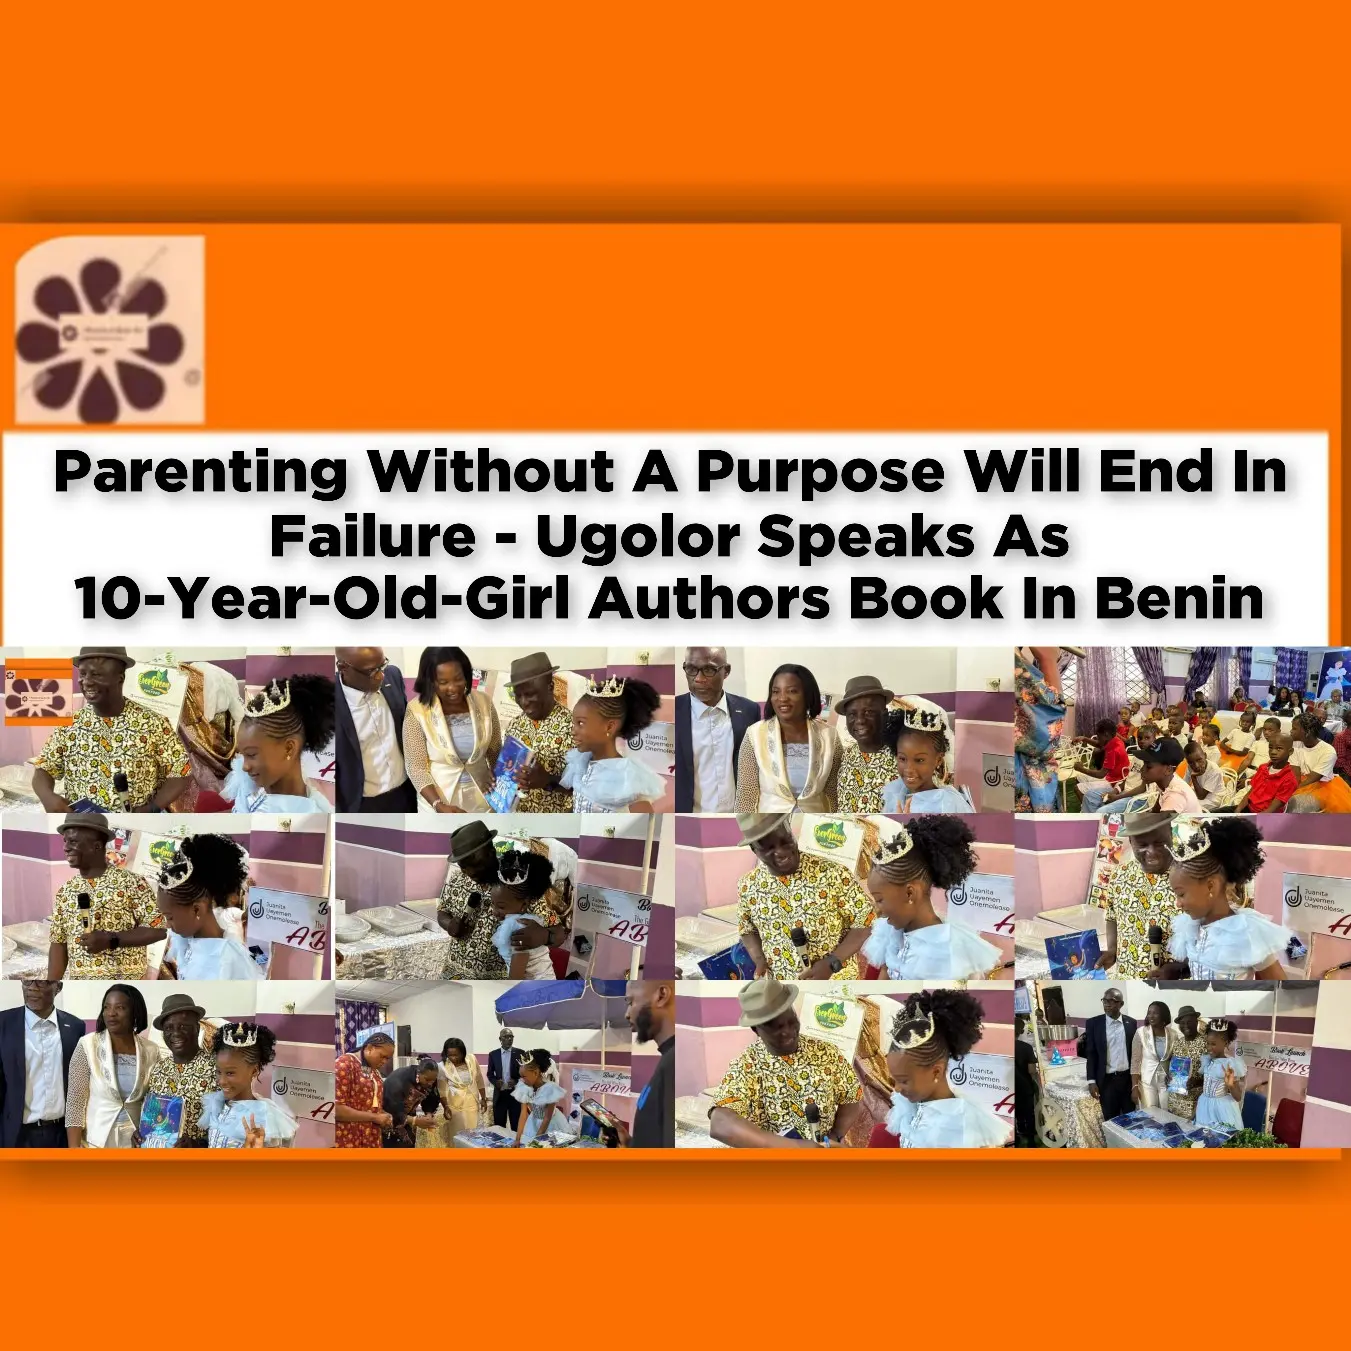 Parenting Without A Purpose Will End In Failure - Ugolor Speaks As 10-Year-Old-Girl Authors Book In Benin ~ OsazuwaAkonedo #Omirhobo